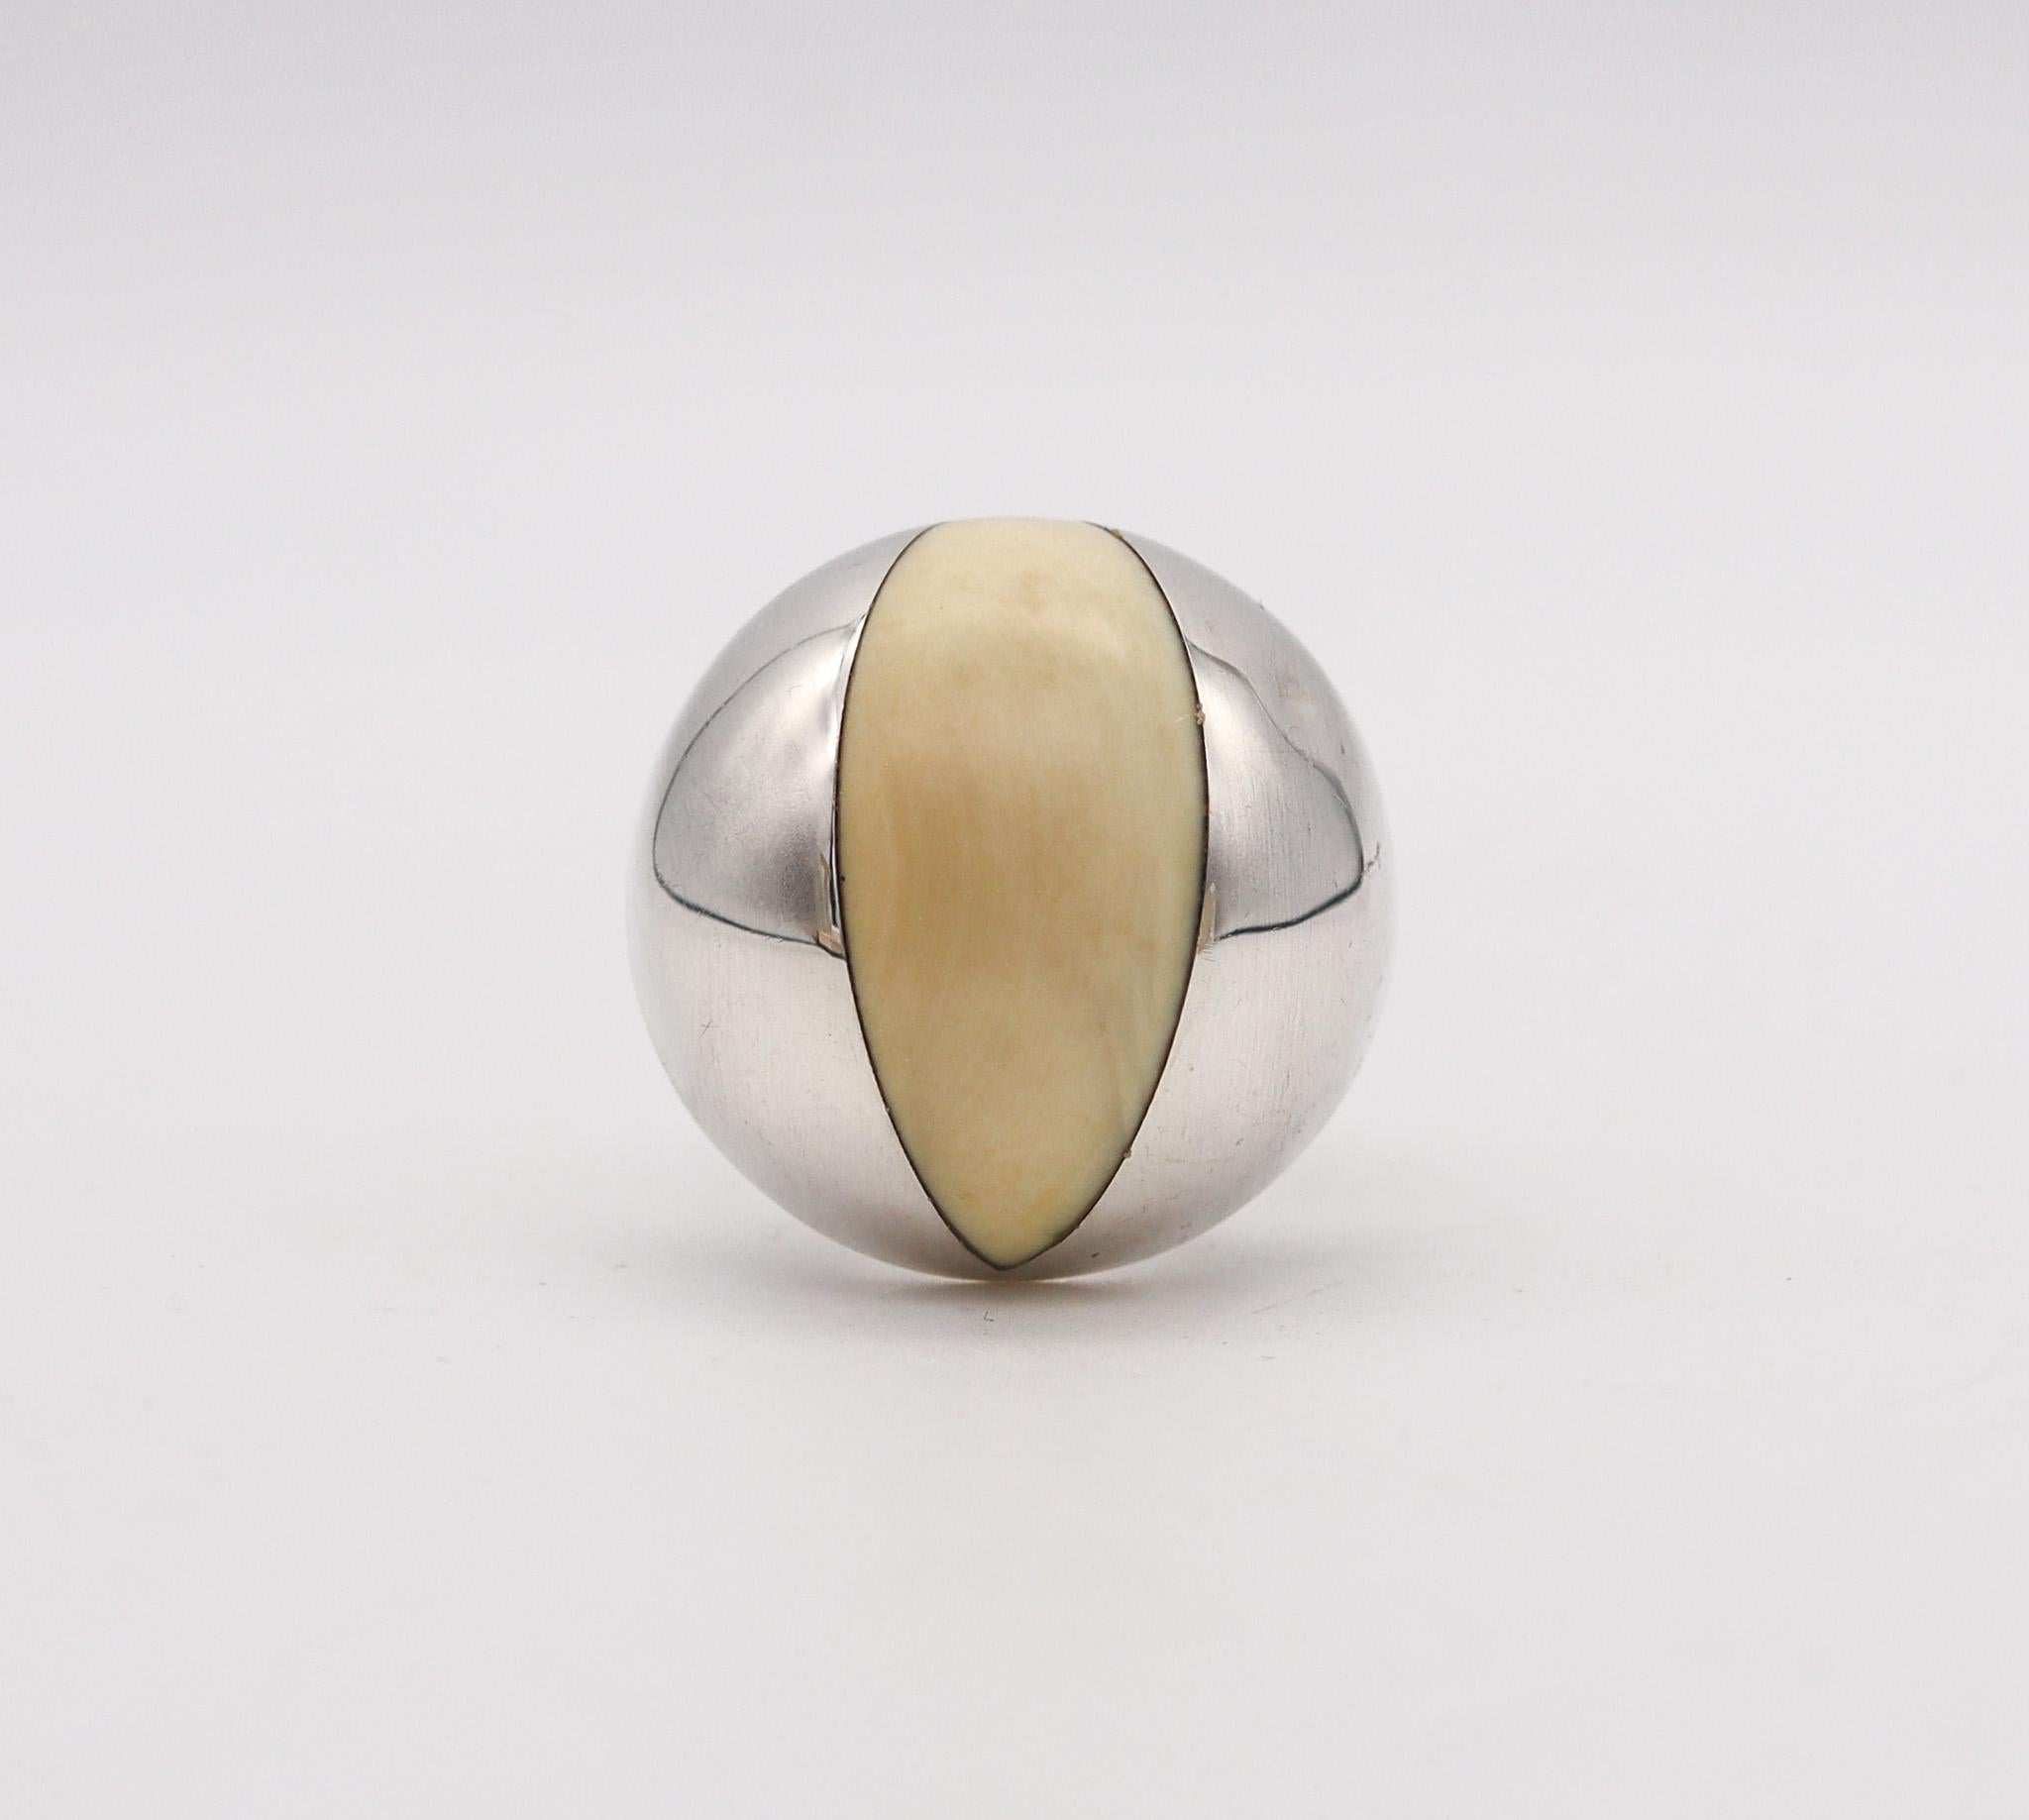 Modernist cocktail ring designed by Joaquin S'Paliu.

This ring is a wonderful example of the Spanish modernist jewelry from the 1970. The cocktail ring was created by the artist jeweler Joaquim S'Paliu in solid .925/.999 sterling silver with high